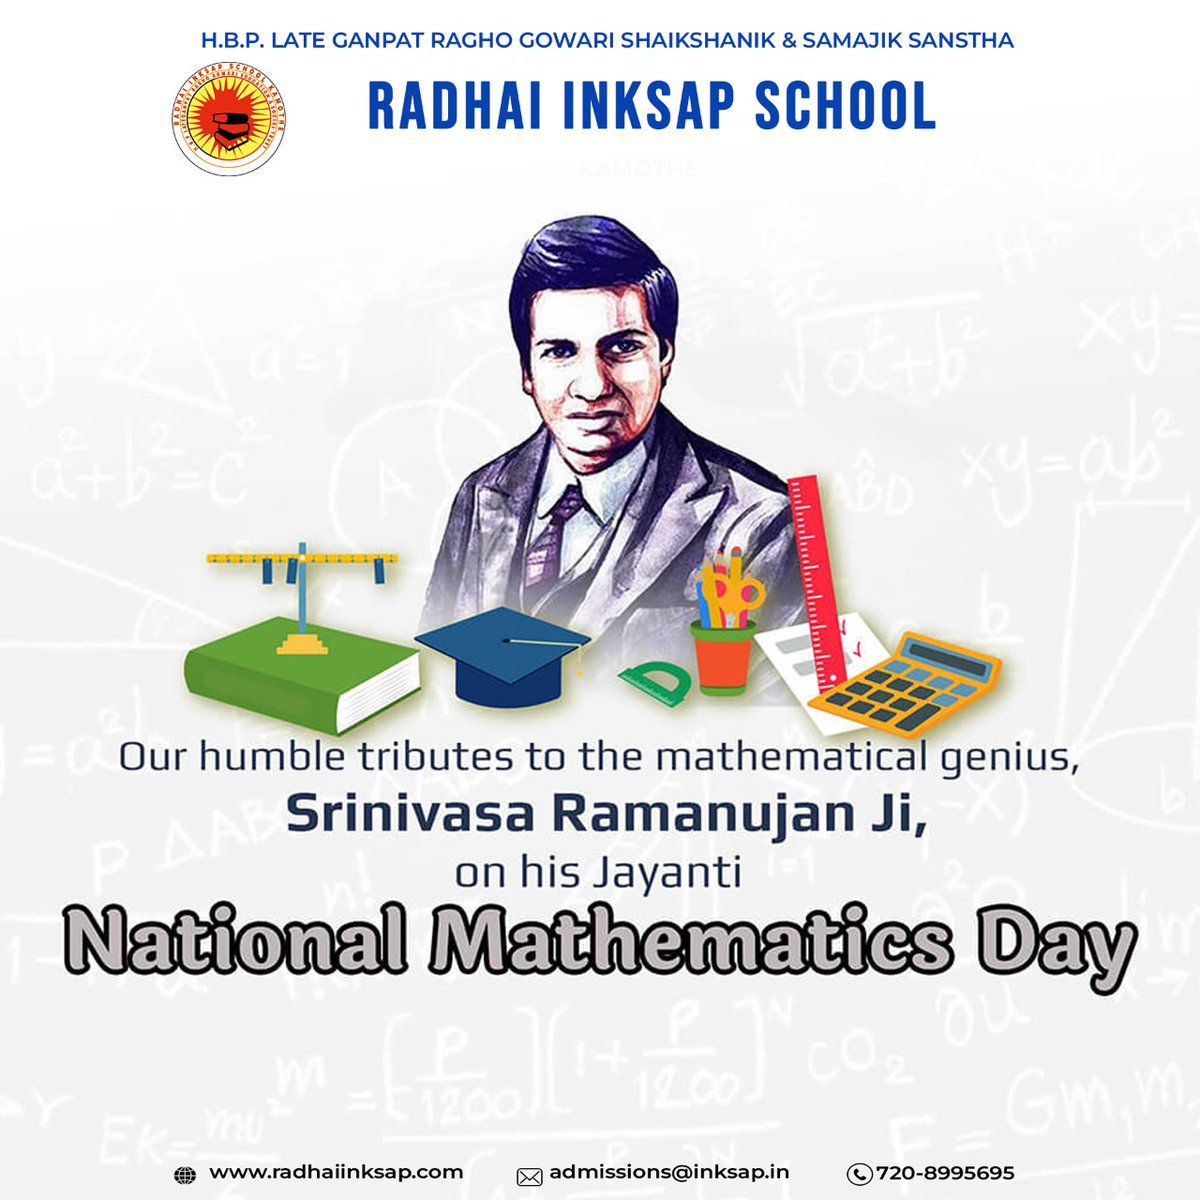 Tribute to the Srinivasa Ramanujan, the Man who knew Infinity, one of the most brilliant mathematicians of 20th century on his birth anniversary.
 #NationalMathematicsDay#srinivasa ramanujan birth anniversary#radhaiinksapschool#ris